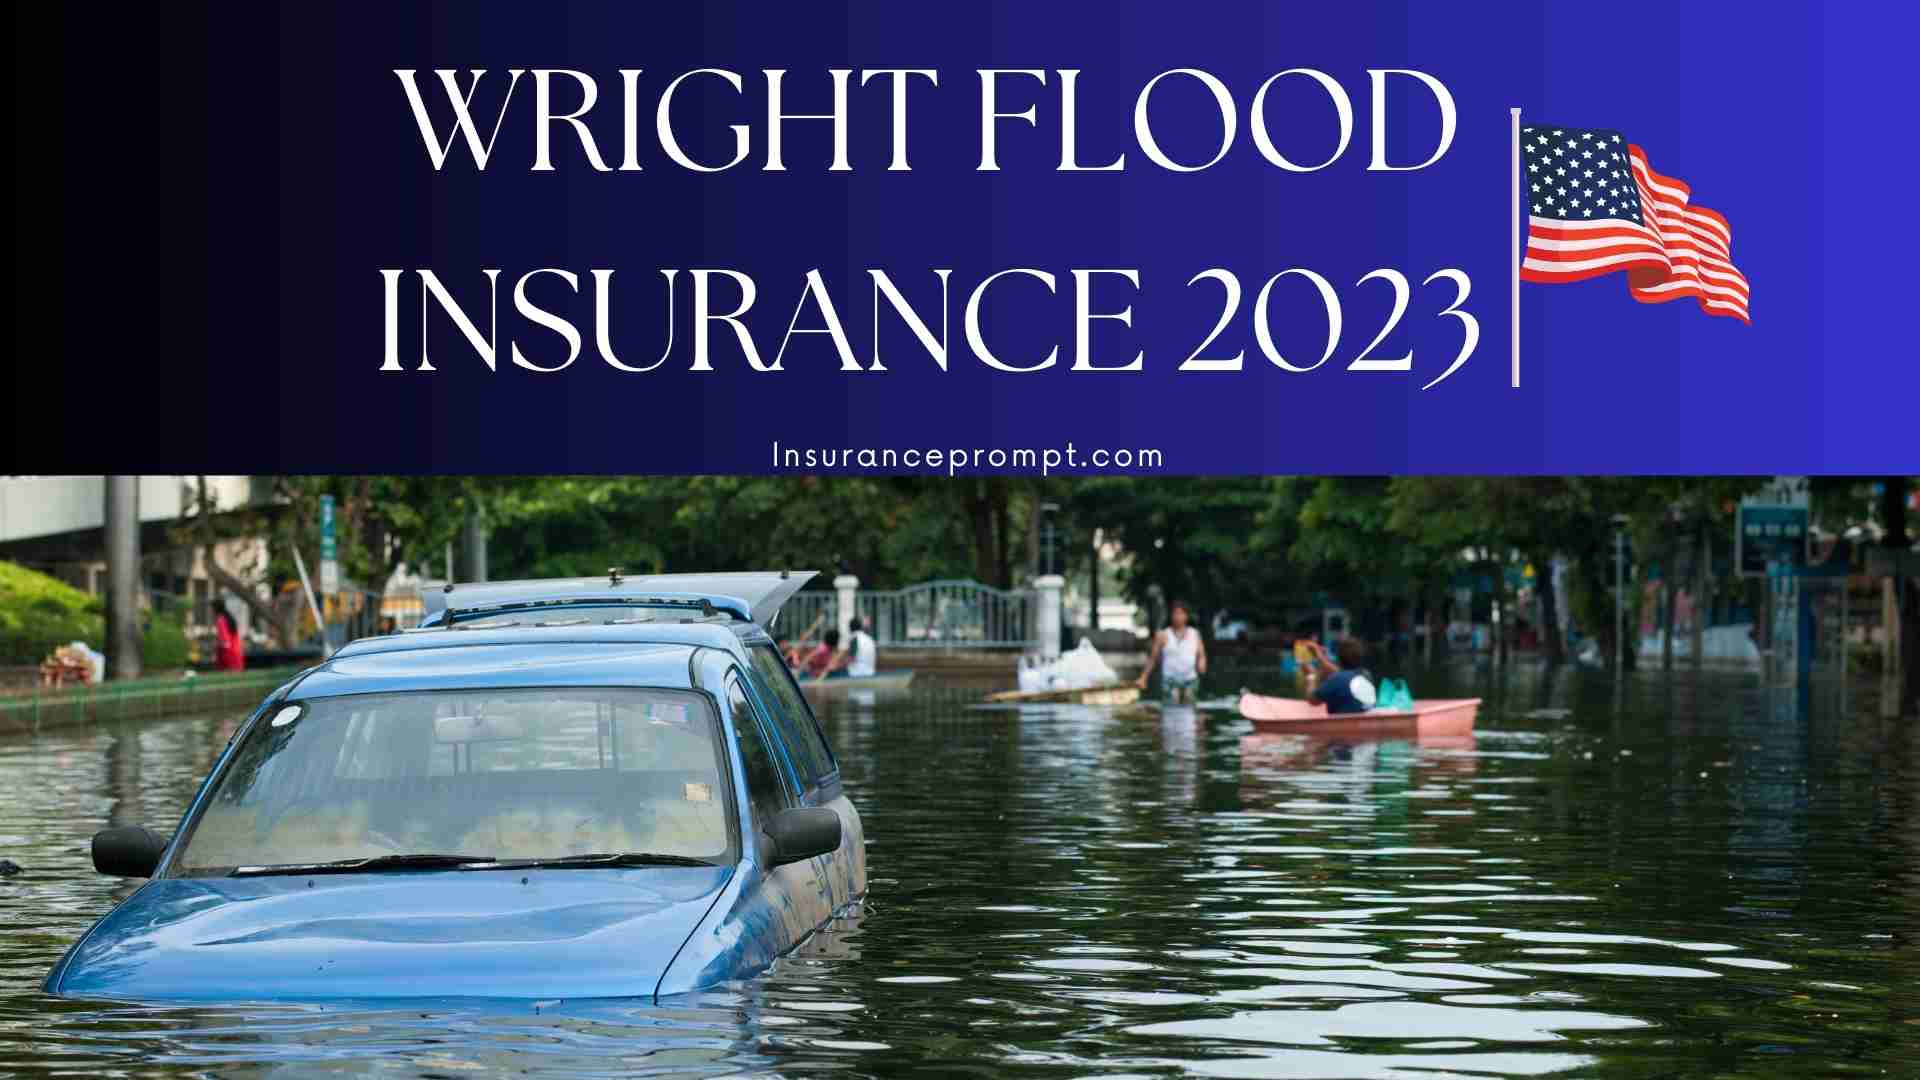 Wright Flood Insurance 2023: Nationwide Property Protection